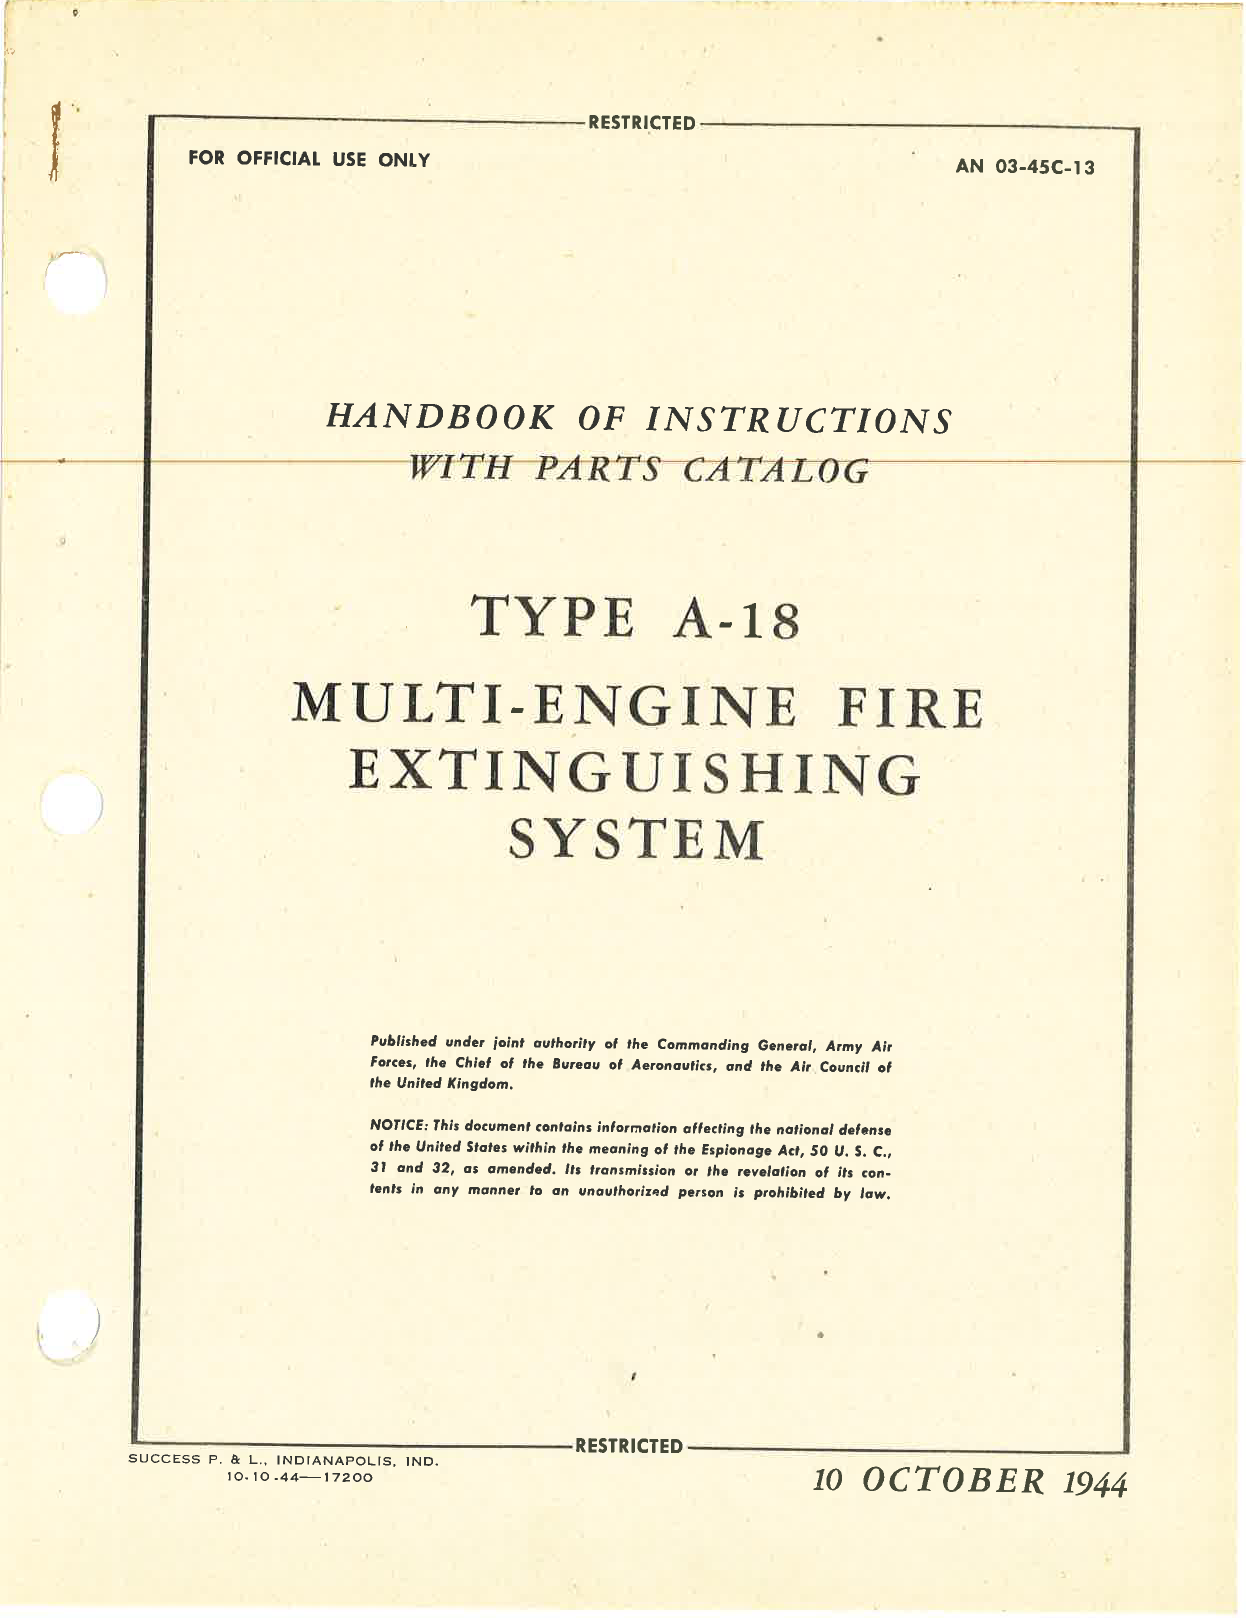 Sample page 1 from AirCorps Library document: Handbook of Instructions with Parts Catalog for A-18 Multi-Engine Fire Extinguishing System